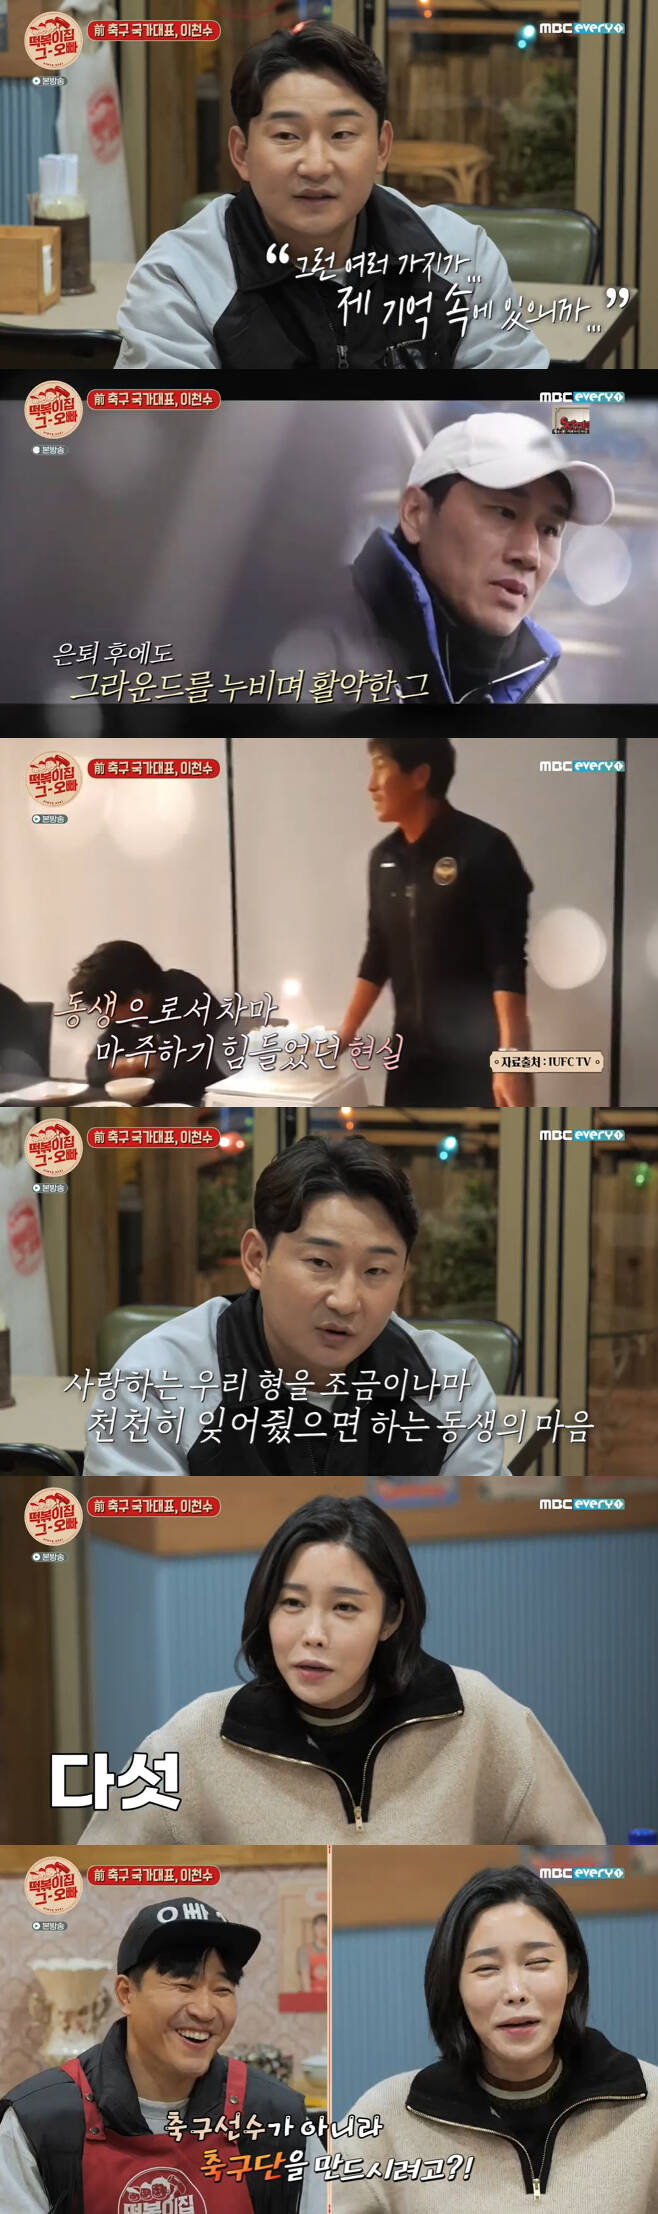 Former footballer Lee Chun-soo has asked not to forget the late Yoo Sang-chul.MBC Everlon entertainment program Tteokbokki house brother broadcasted on the 22nd was decorated with the theme of National Representative.Lee Chun-soo asked about the current situation and shrugged, saying, Soccer is resting, football entertainment, family entertainment.Is not it the second prime time? asked Kim Jong-min, nodding and laughing.Lee Chun-soo also said that he had been sent off more than 70 times as a player, so he paid a fine of 75 million won.When asked what the national team is like, he said, I am proud. I feel tears when I wear national uniforms.There was also a story about Yoo Sang-chul, who had a different relationship with Lee Chun-soo, who died in June last year after being diagnosed with stage 4 pancreatic cancer in 2019.Lee Chun-soo said: When I was diagnosed with cancer (Yoo Sang-chul) I was the first to know: I wasnt in any kind until the day before, but I learned as jaundice suddenly came.I thought I was not teaching on the bench, but I could not break my will. He also said, There are many things in my memory.I hope you dont forget it quickly. I hope you fans will forget it slowly. Soon after, Lee Chun-soos wife, Shim Ha-eun, also appeared.Although they have three children now, Shim Ha-eun said that he still has a desire for two years old and said he wants to have five children.My husband had so many issues that I would have a bad name in front of his name.There is a distinctive tone, and the old sisters are not Missunderstood (the tone), he said, saying that there is a warm righteousness in the cold.Speed ​​skating national team Cha Min-gyu and Kim Min-seok also visited Tteok-bokki house.Cha Min-gyu, who won the 500m silver medal for speed skating men at the Beijing Winter Olympics, said there is still a point left in Memory: I made a mistake in the last three or four corners.The left foot skating day was strange, but I adjusted and got on because I would not get better if I touched the day before the game, but I was slightly squeaky in the corner at the game. If it was not for this, I would not have been able to win a gold medal.Cha Min-gyu made a topic by doing a ceremony using a podium with his hand. He said, I did it with the intention of clearing up and going up, but suddenly I got a lot of Chinese evil.My video has reached 200 million views on the famous Chinese portal site.I heard later, but it seems that Misunderstood occurred because Canadian athletes were dissatisfied with the decision and had similar ceremony at the Pyeongchang Olympics. Kim Min-seok, who won the 500m bronze medal, said: Im still hungry.I want to go higher as a stepping stone to this Olympics because I am an Olympic champion. Cha Min-gyu said that he had suffered a serious injury in the past when he was injured in an accident on the blade.It took six months to recover and a year to skate. The injured legs still do not show their former skills. I was lucky, said Cha Min-gyu, and I had a simple rupture of my muscles. I recovered in a week.